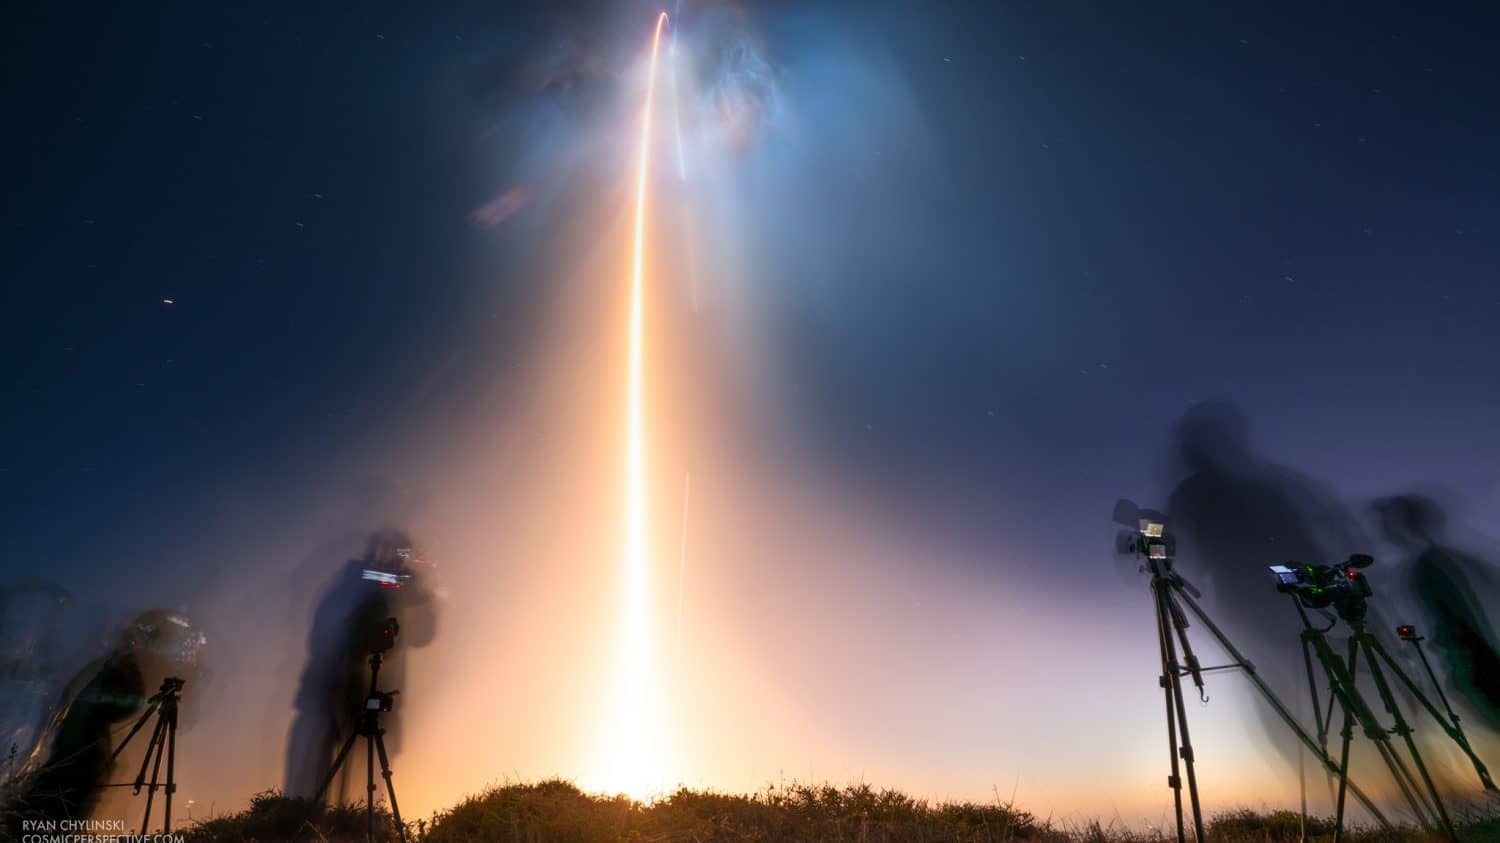 Image: spacex launch streak of light on a dark cloudy sky